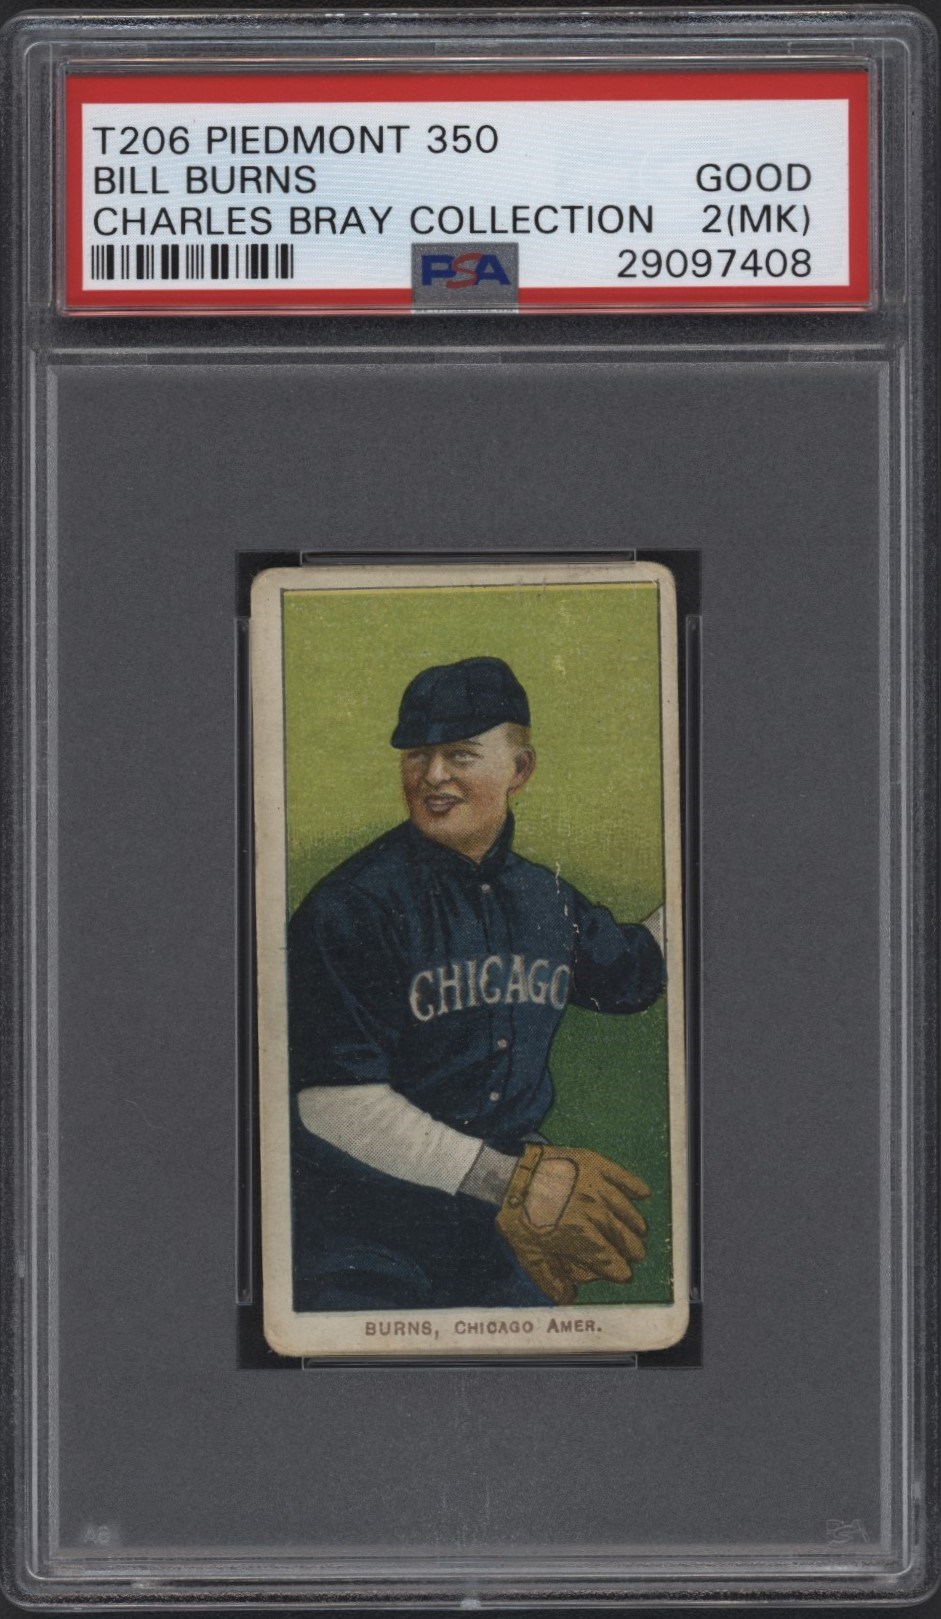 Baseball and Trading Cards - T206 Piedmont 350 Bill Burns PSA 2 From the Charles Bray Collection